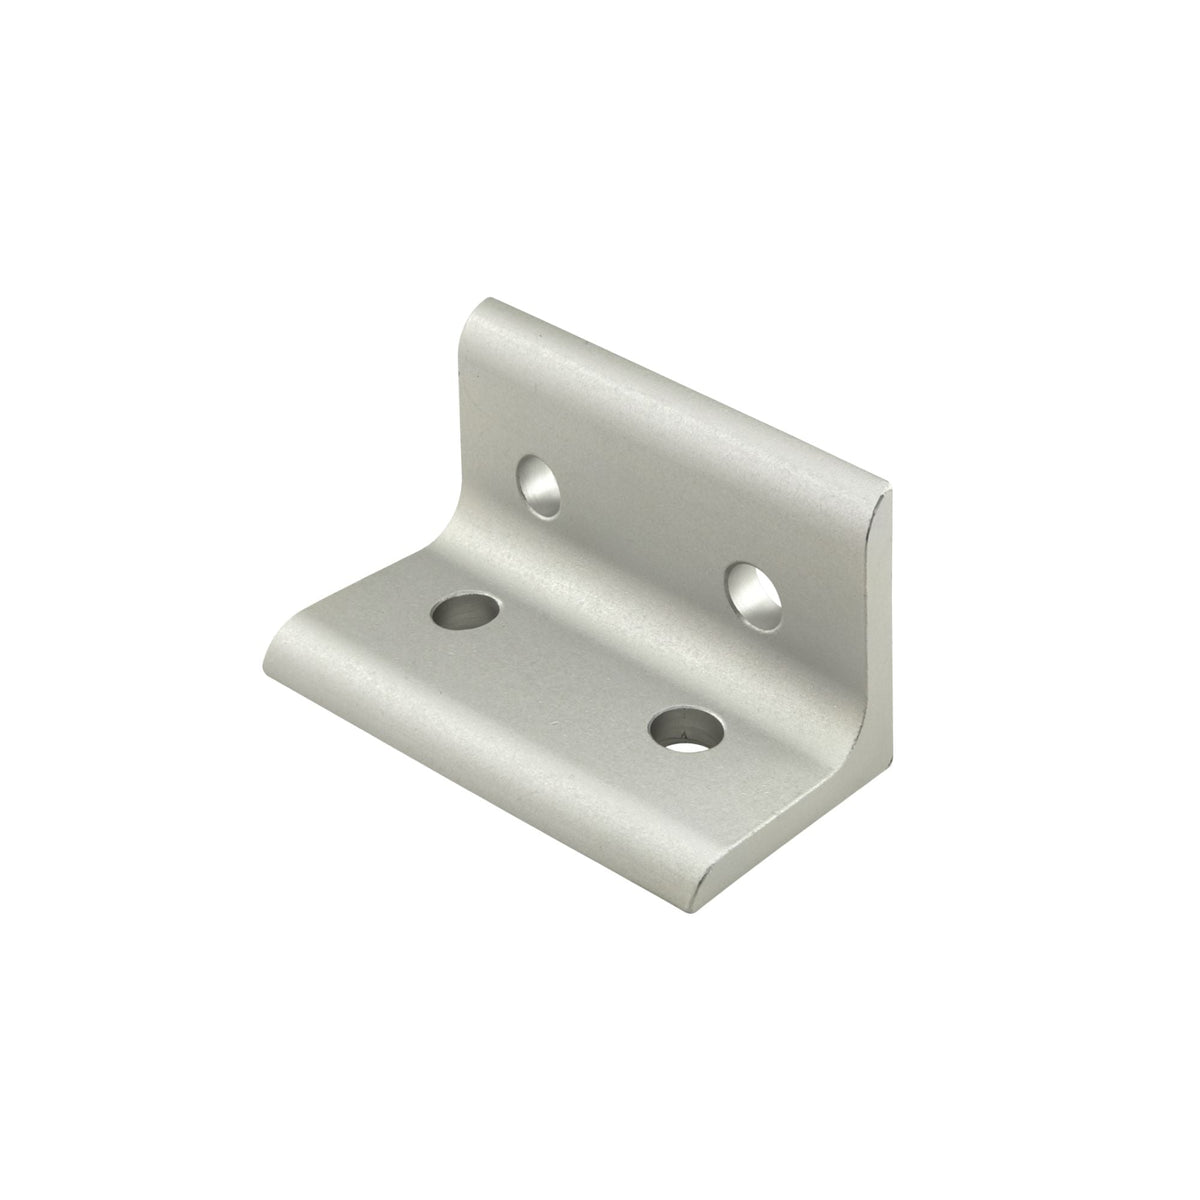 wide metal corner bracket with two mounting holes on each of the two sides